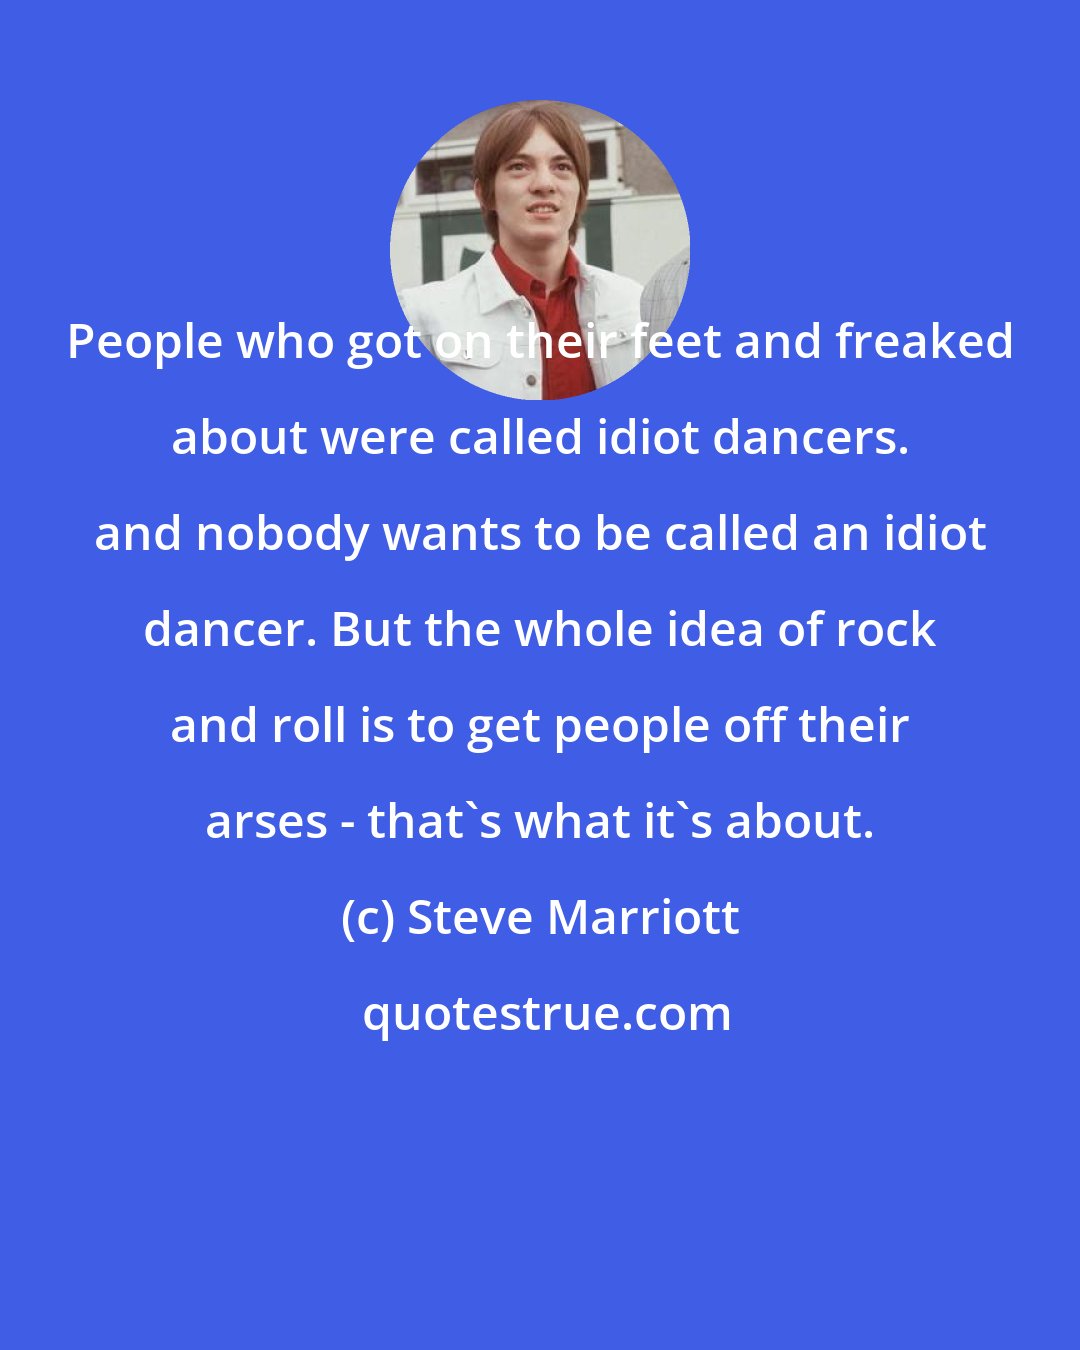 Steve Marriott: People who got on their feet and freaked about were called idiot dancers. and nobody wants to be called an idiot dancer. But the whole idea of rock and roll is to get people off their arses - that's what it's about.